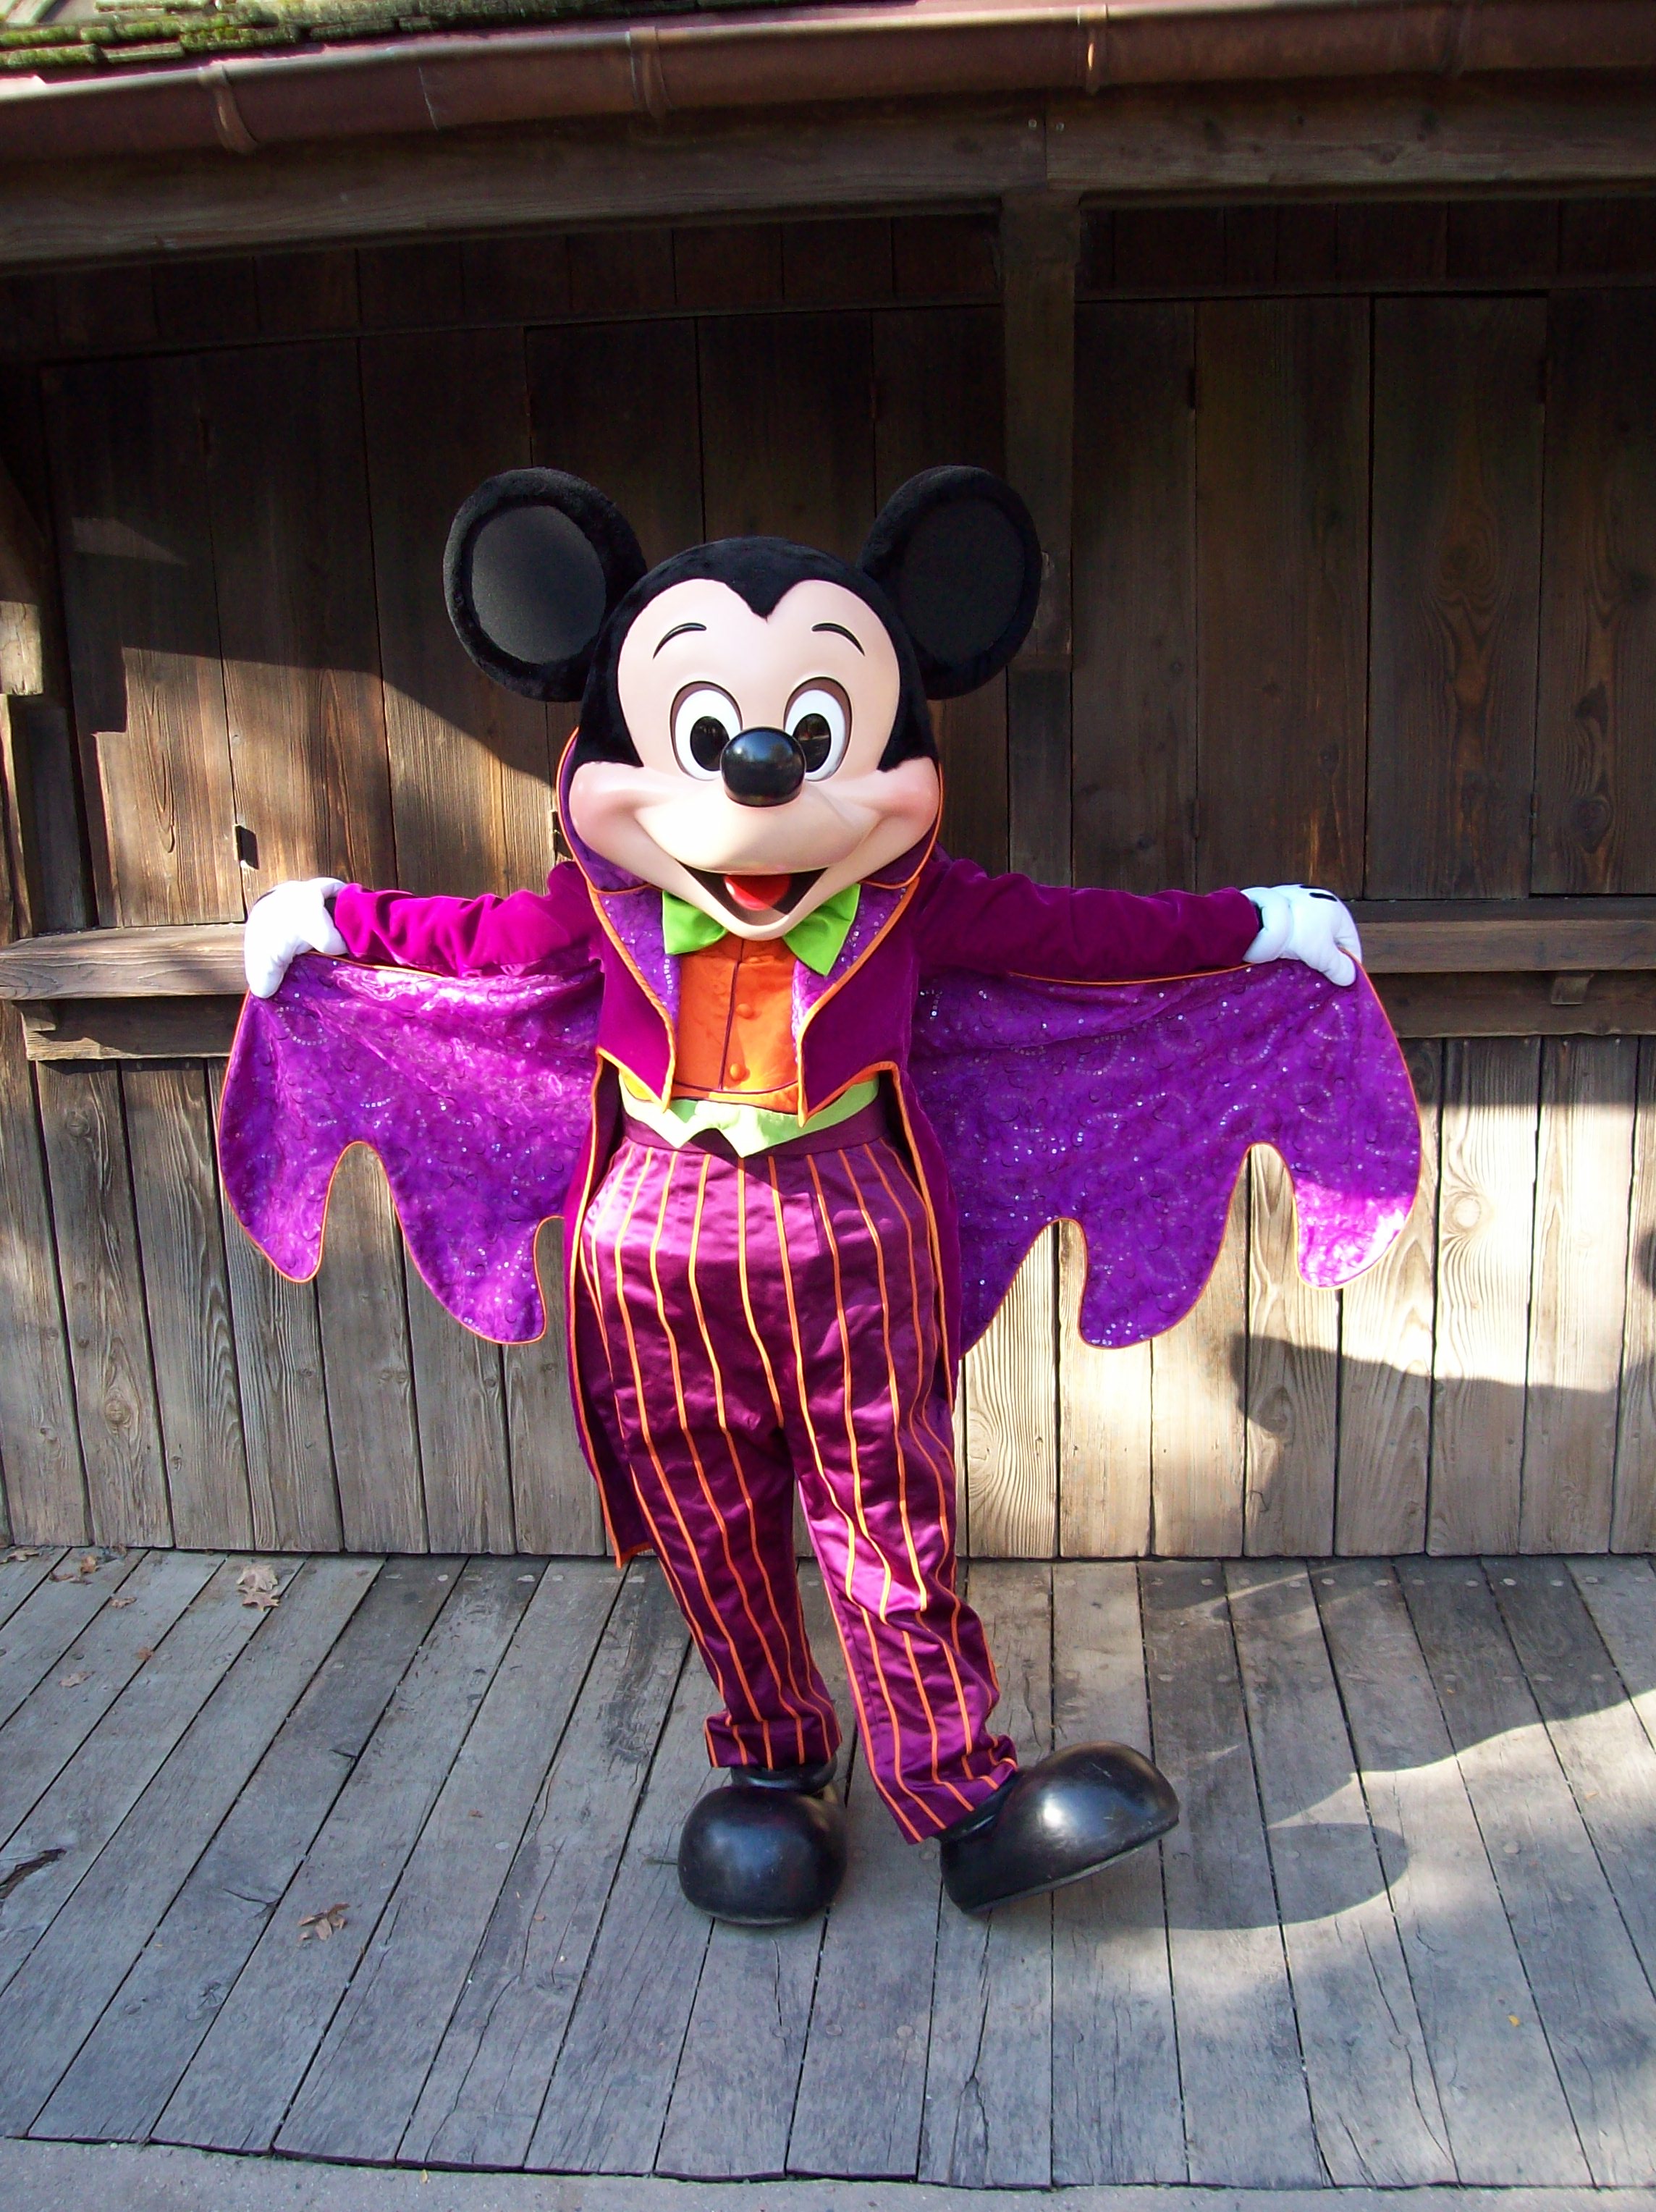 In 2008 Mickey was showing his Halloween side by wearing this purple Halloween outfit. Mickey couldn't decide if he wanted to wear his top hat with it or not, in this photo he decided to not wear it.